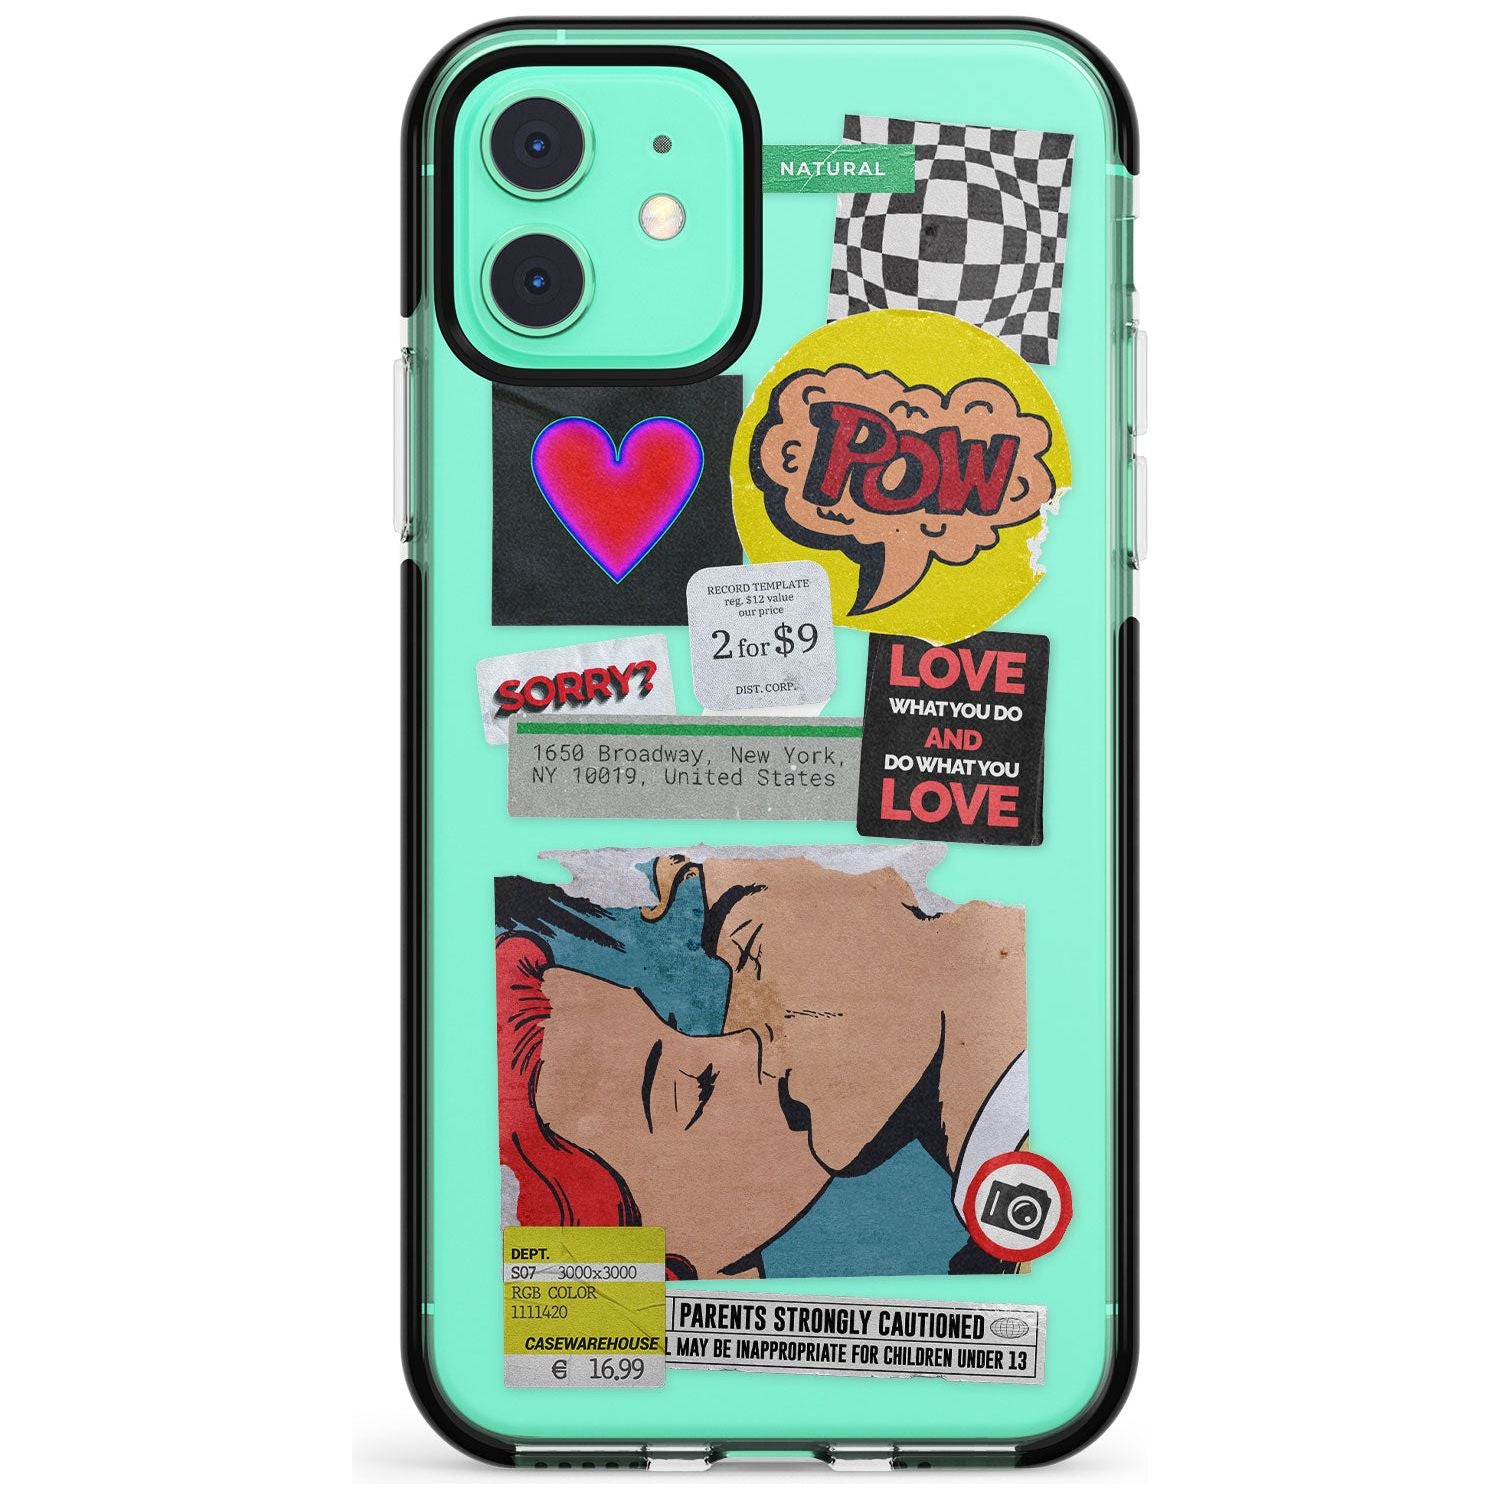 Retro Sticker Mix Pink Fade Impact Phone Case for iPhone 11 Pro Max